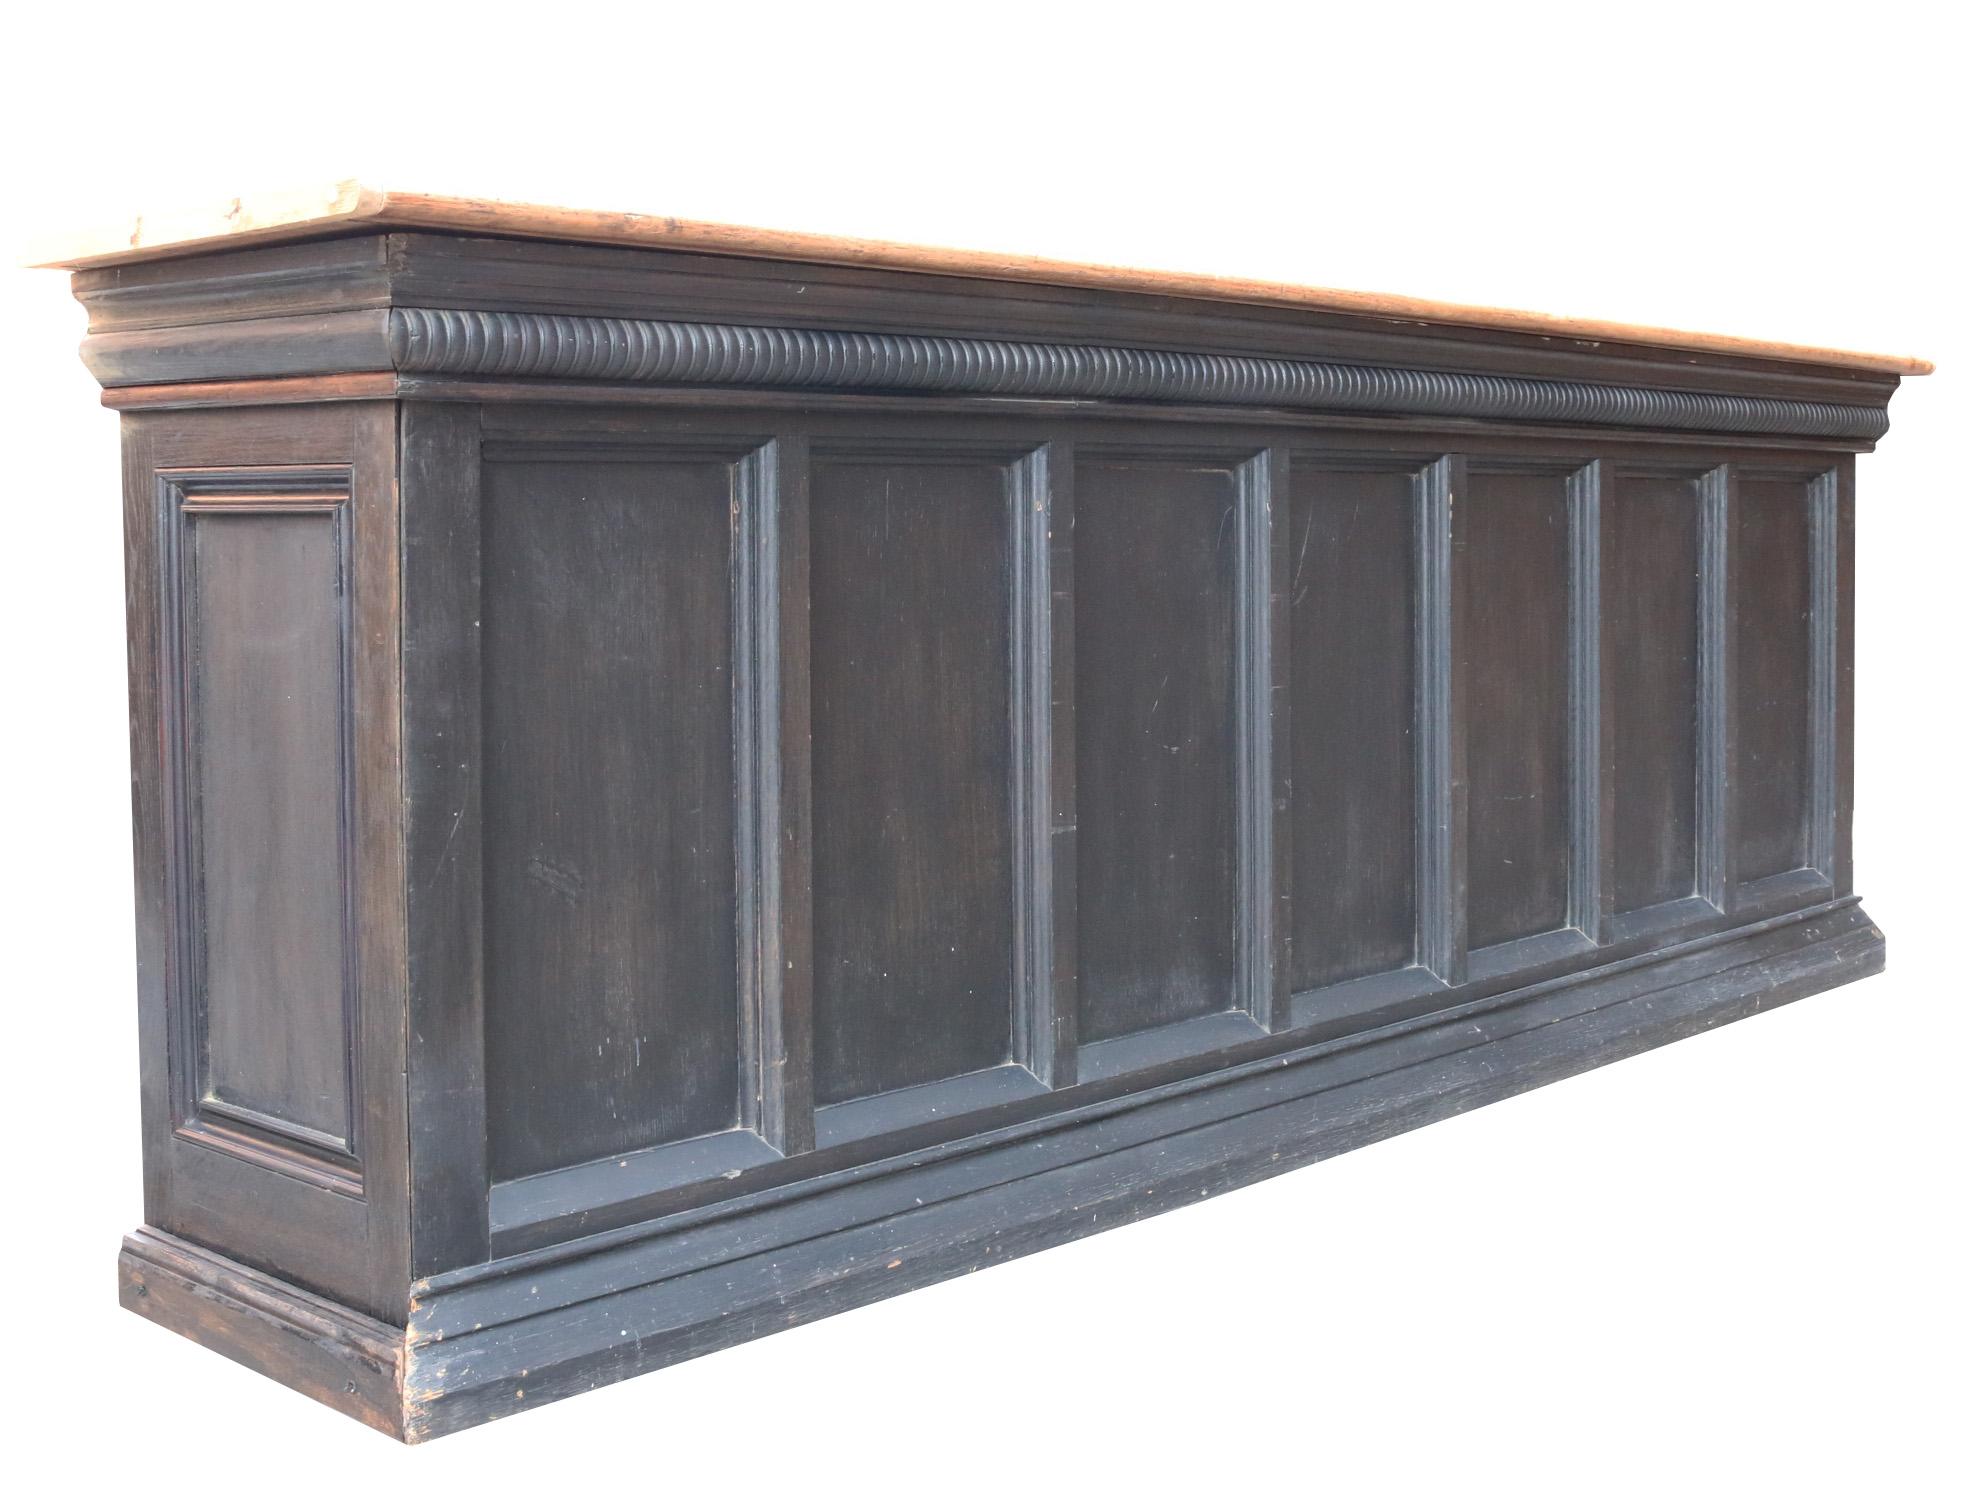 Reclaimed stained oak bar or shop counter. Weight: 107 kg.